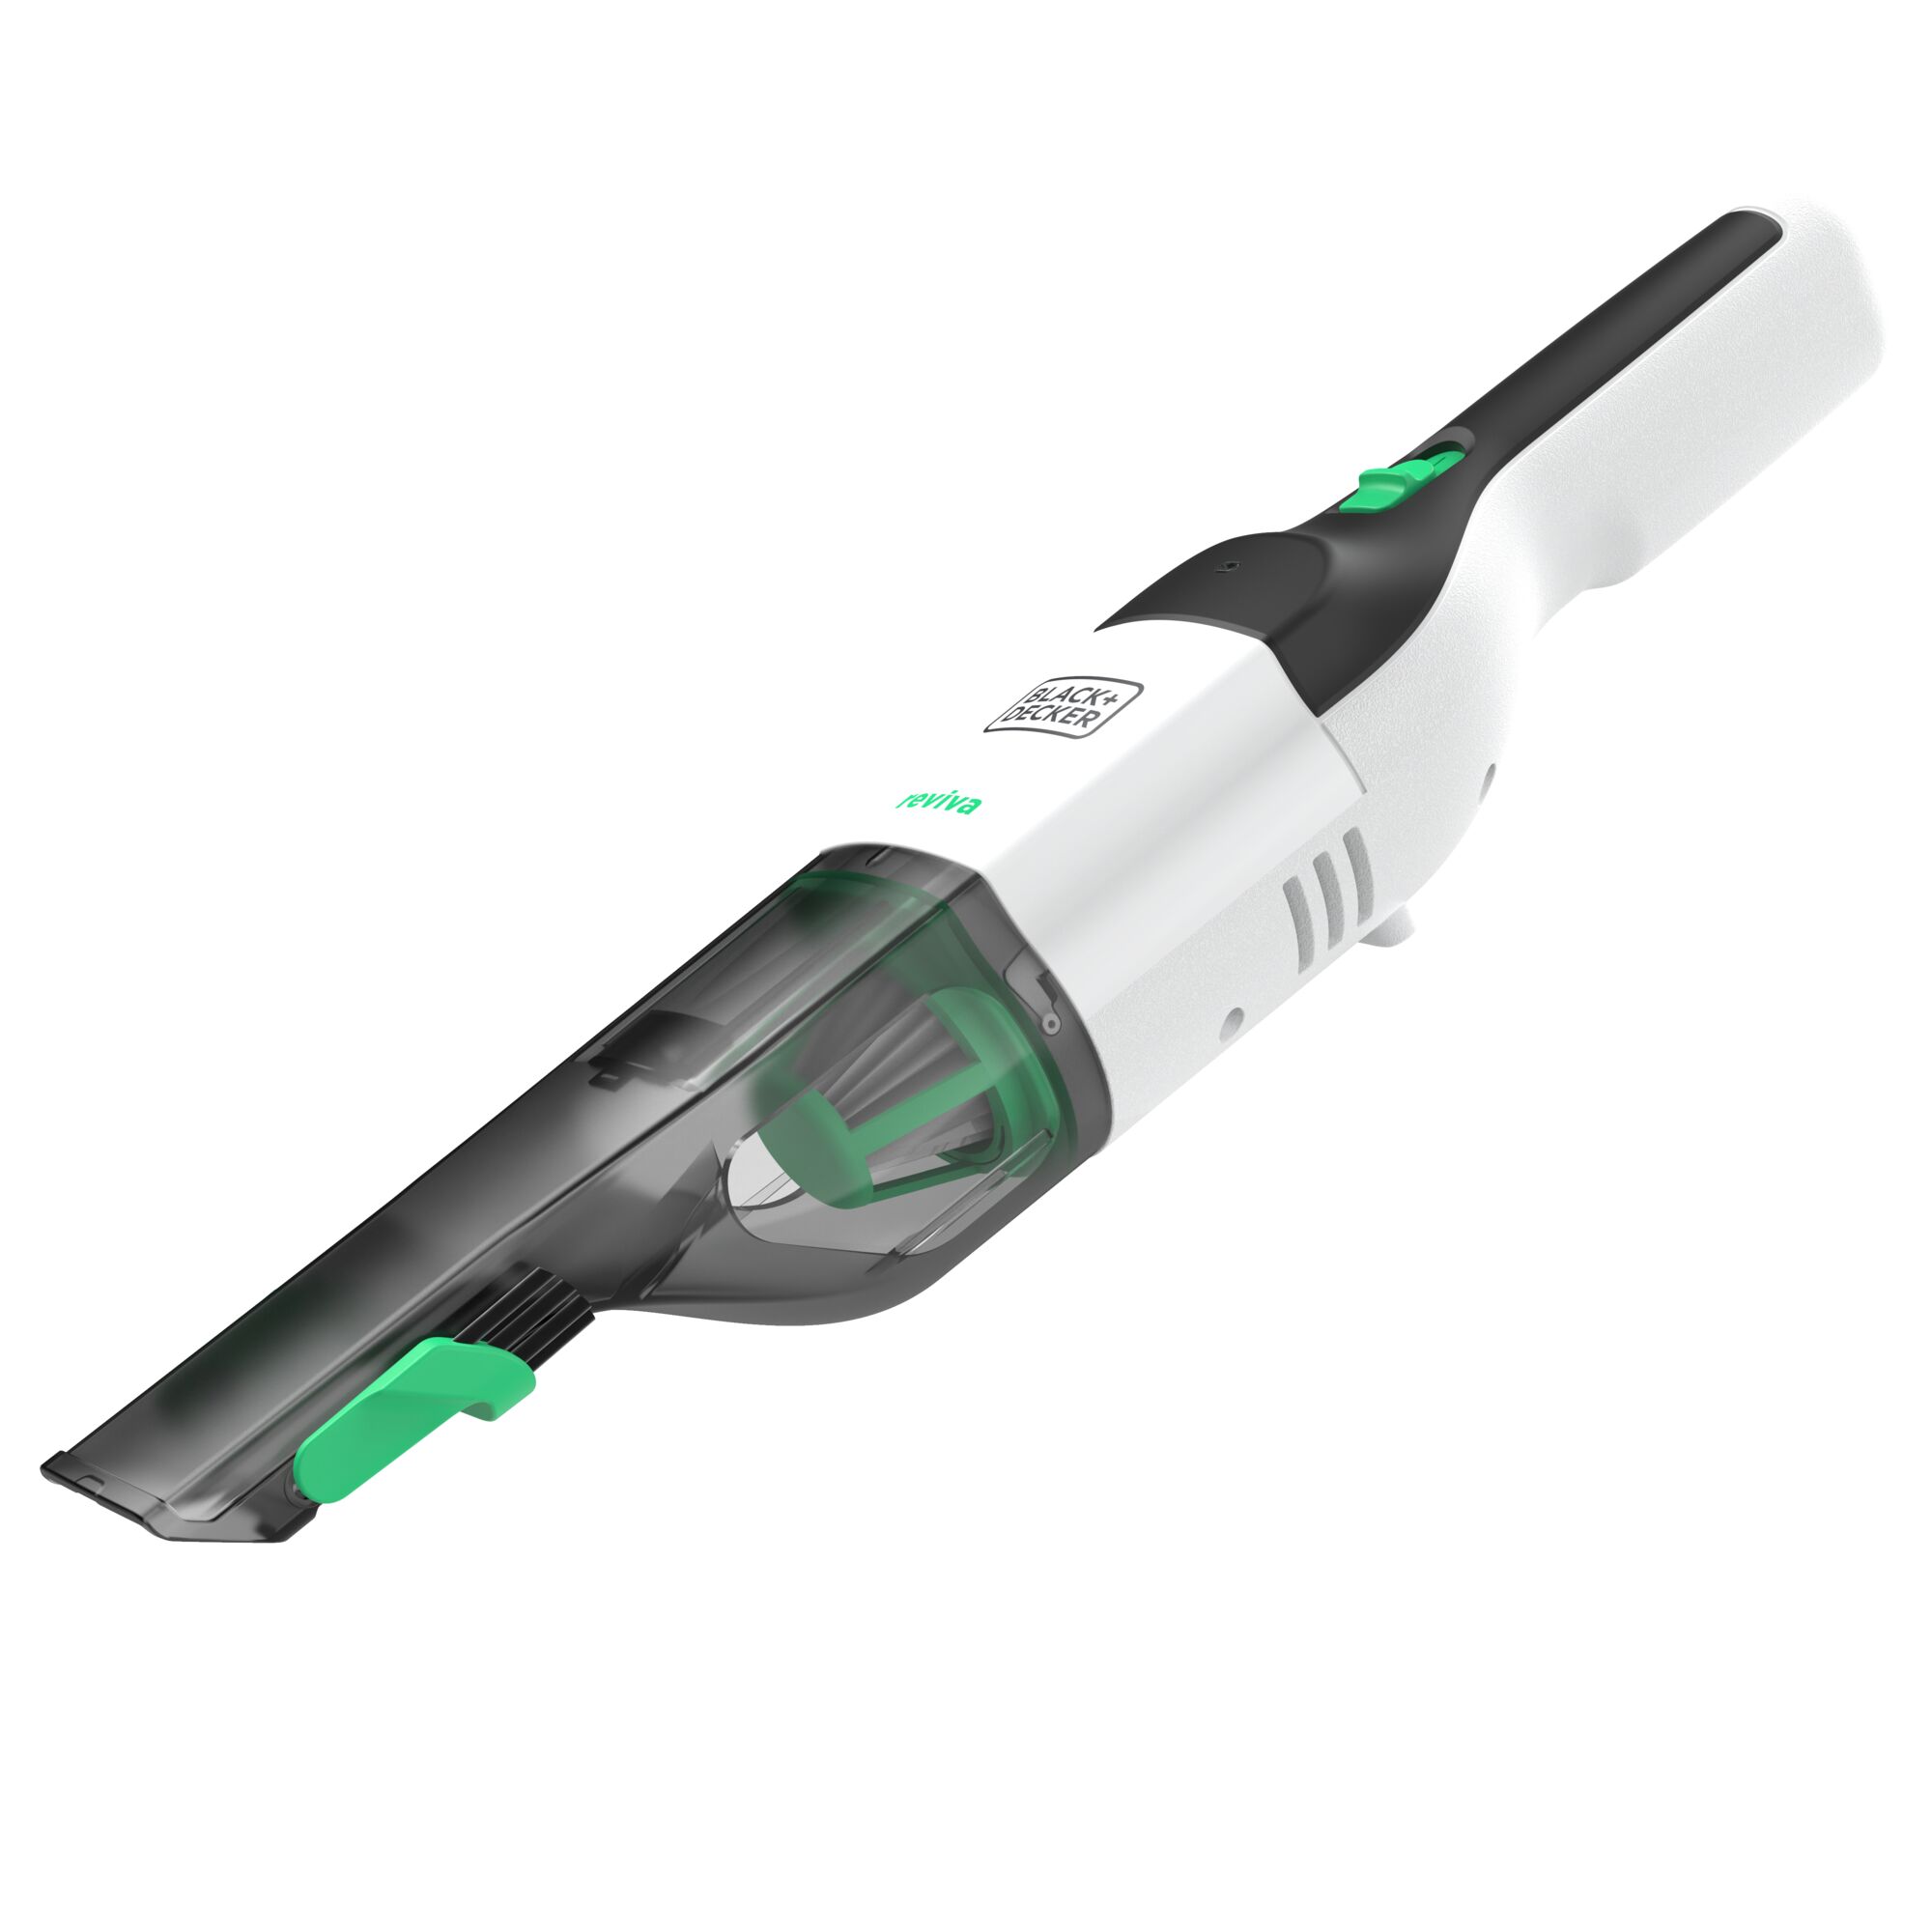 3/4 view of the BLACK+DECKER reviva hand vac on a white background